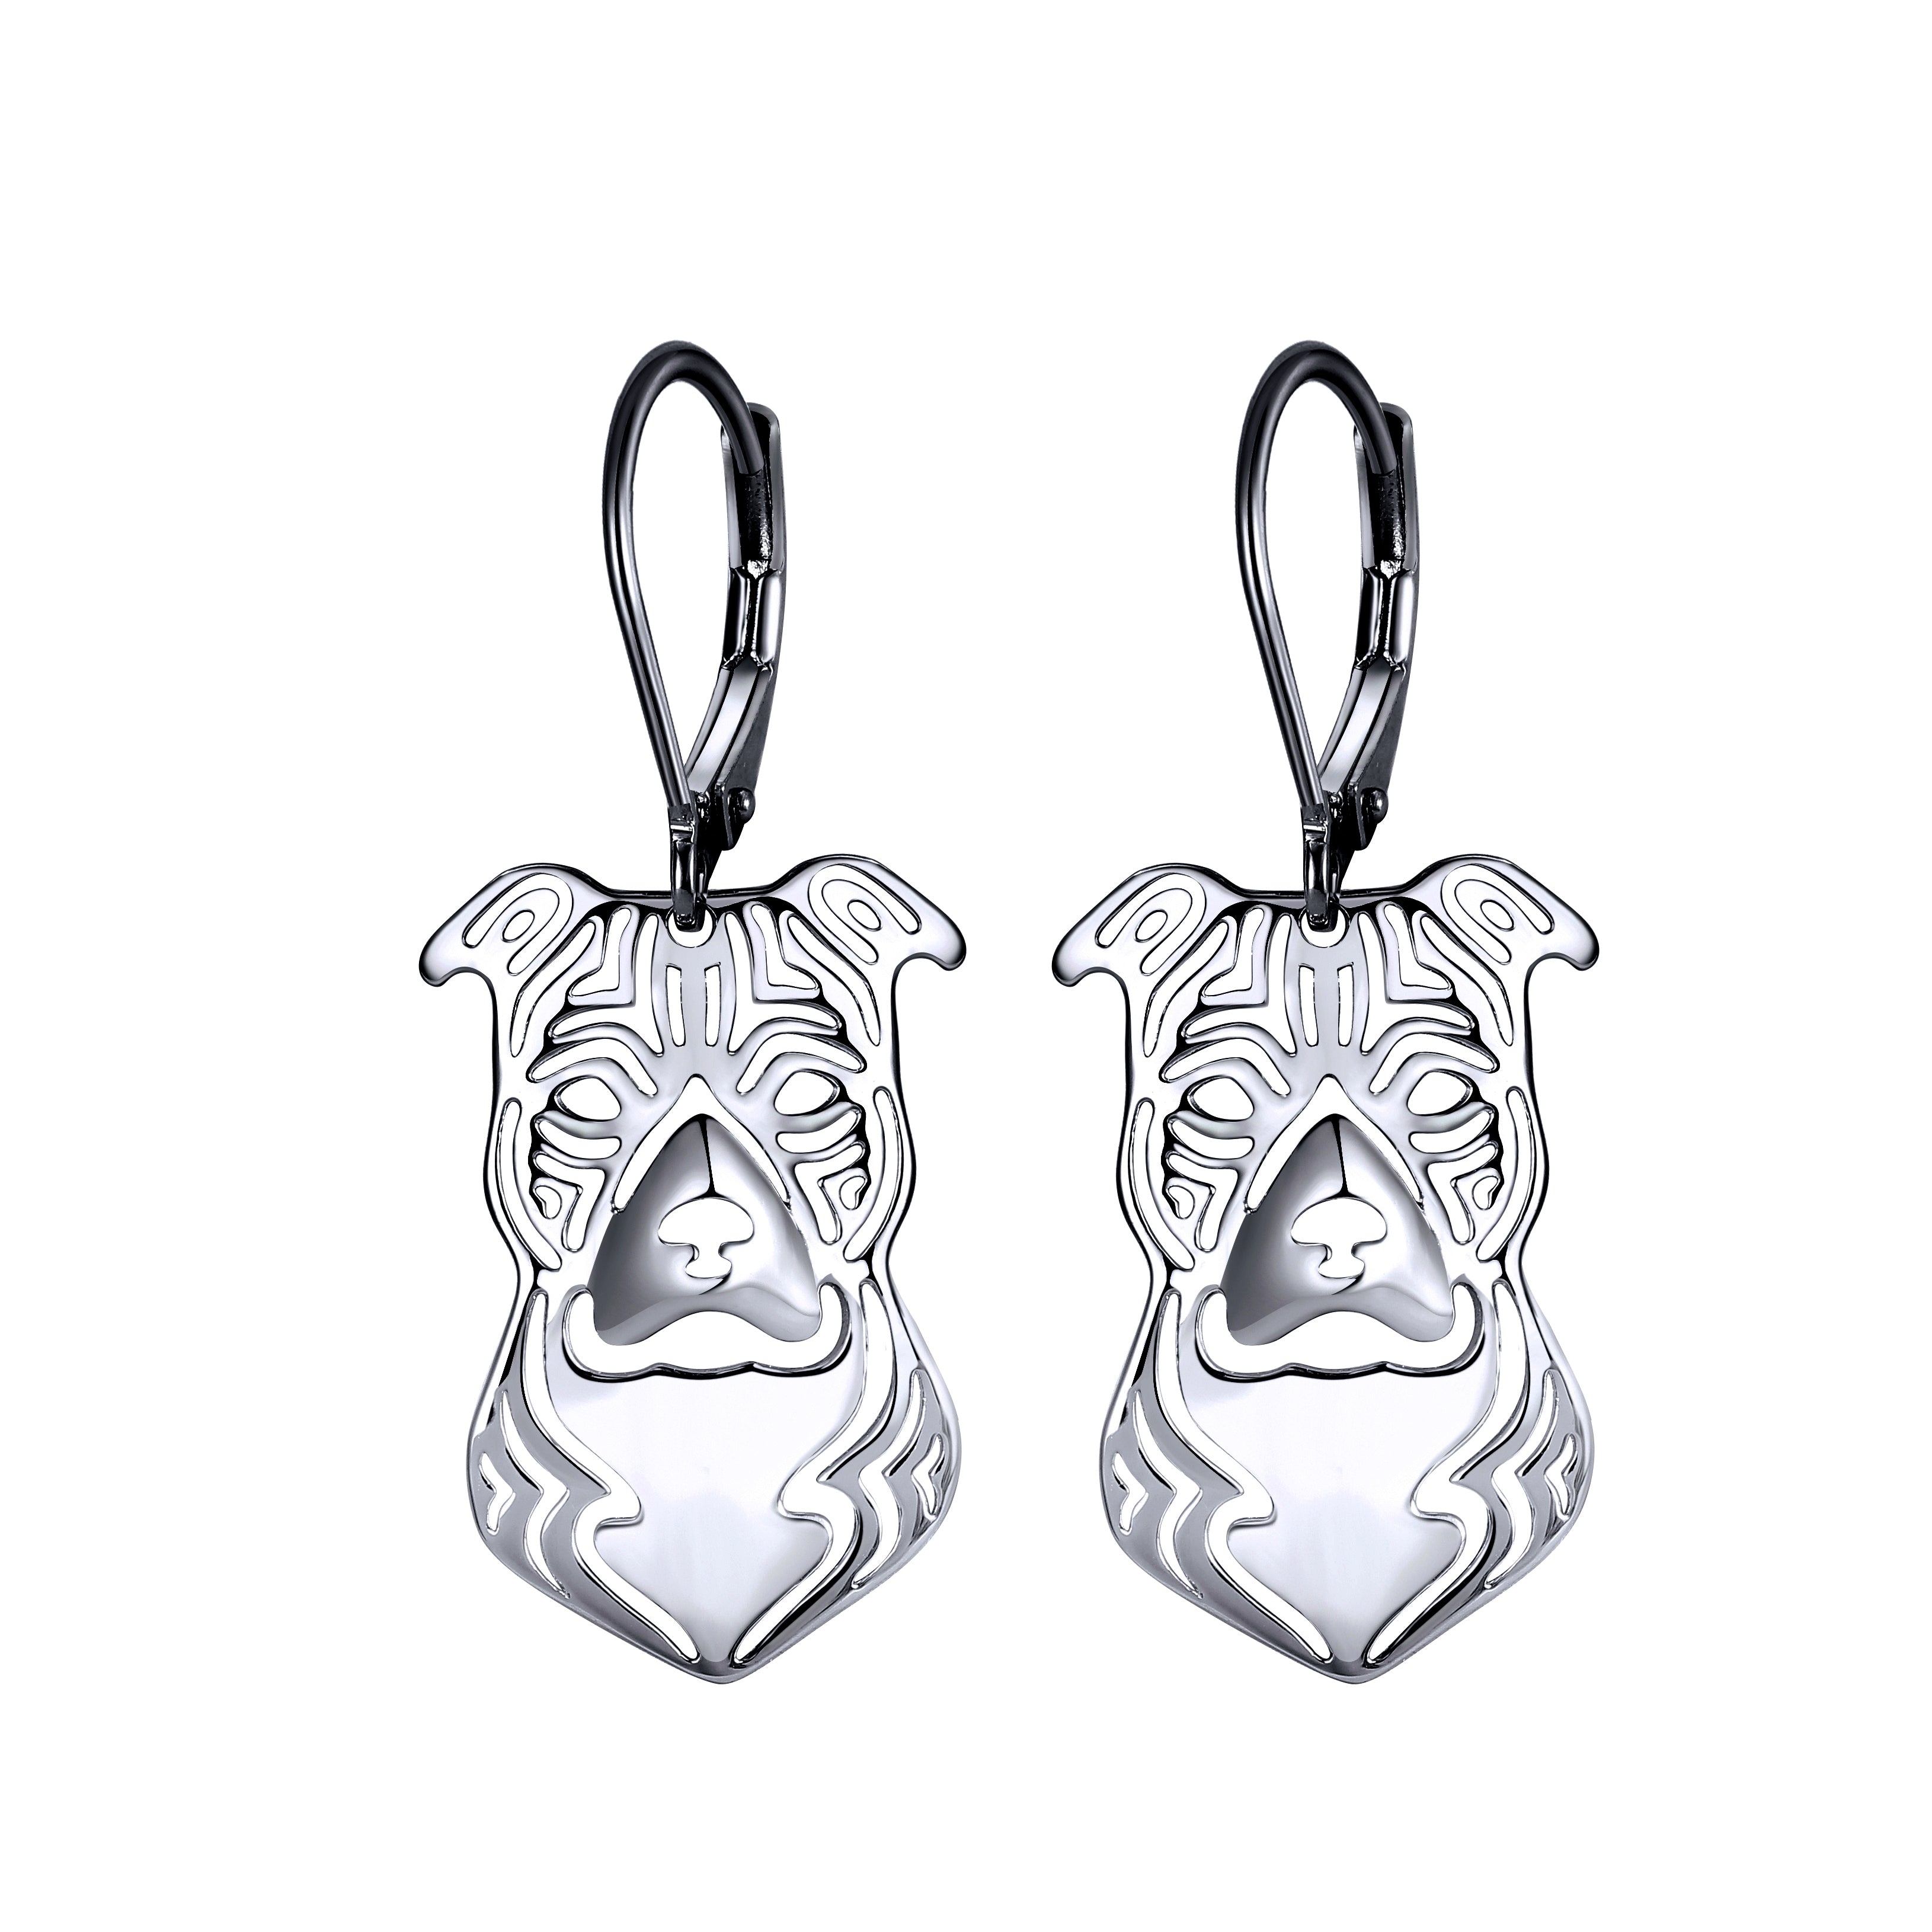 Pit Bull Staffordshire Terrier Dog Earrings Silver Womens Ginger Lyne Collection - Stafford Earrings